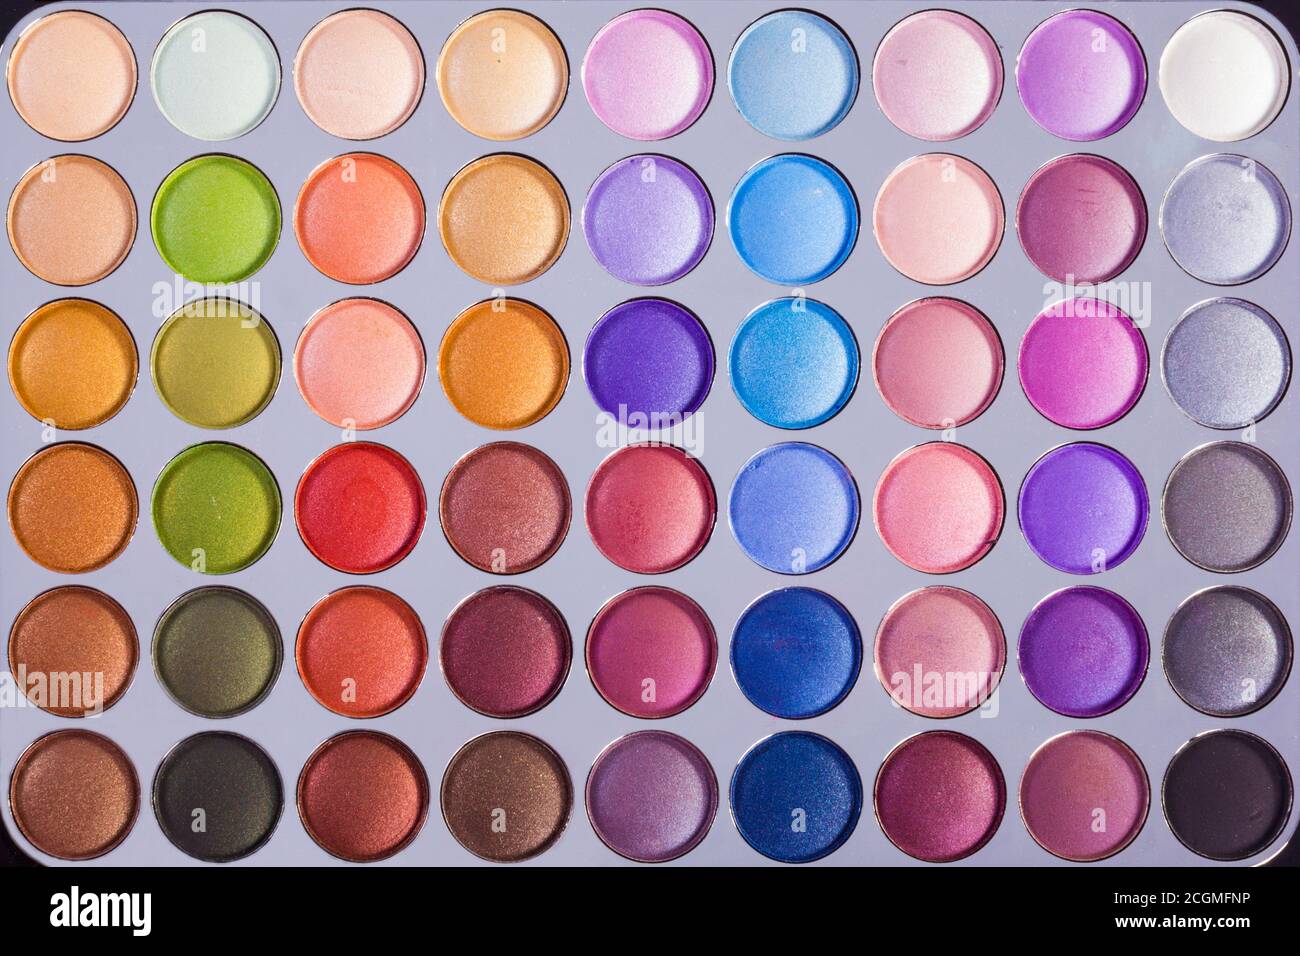 Colorful eye shadows palette, close-up Stock Photo